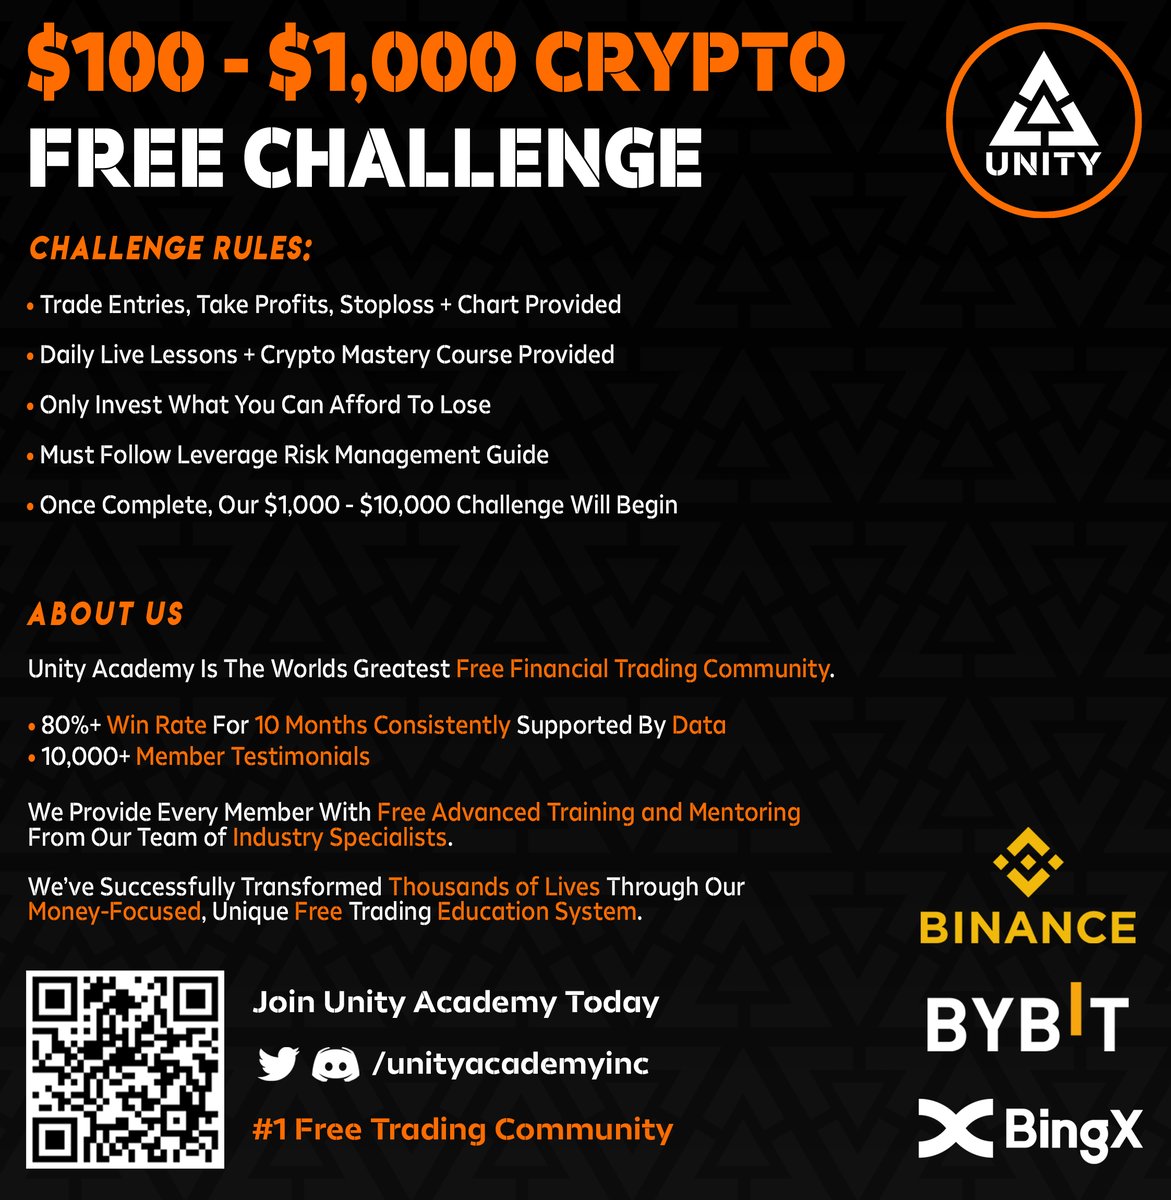 $100 - $1,000 Crypto Trading Challenge 💸👇 Once Complete, Our $1,000 - $10,000 Challenge Will Begin. ⛩️| Unity Info • 10,000+ Member Testimonial Posts. • 80% Win Rate For The Past 10 Months. 📝| How To Join: 1⃣ Retweet & Tag 2 Friends 2⃣ Join Free Discord | Link In Bio